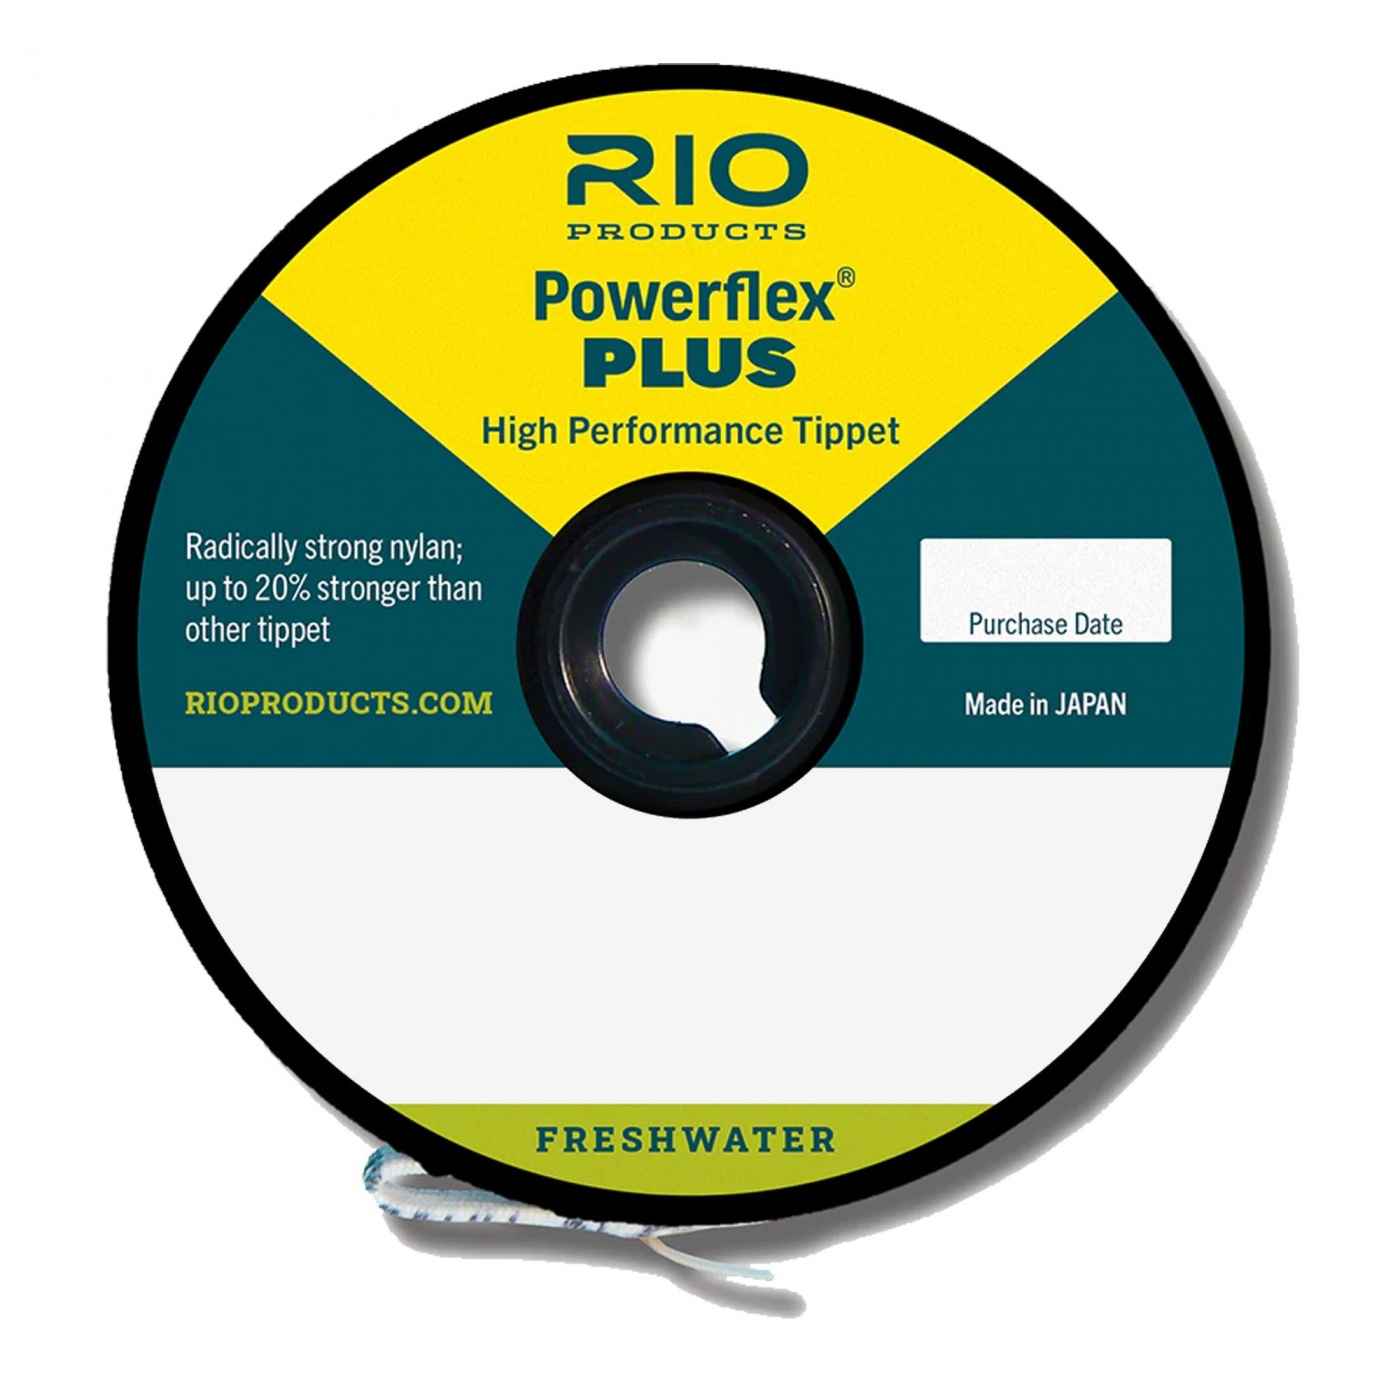 Rio Products Powerflex Plus Tippet 5X 6lb / 2.7kg For Trout & Grayling Fly Fishing